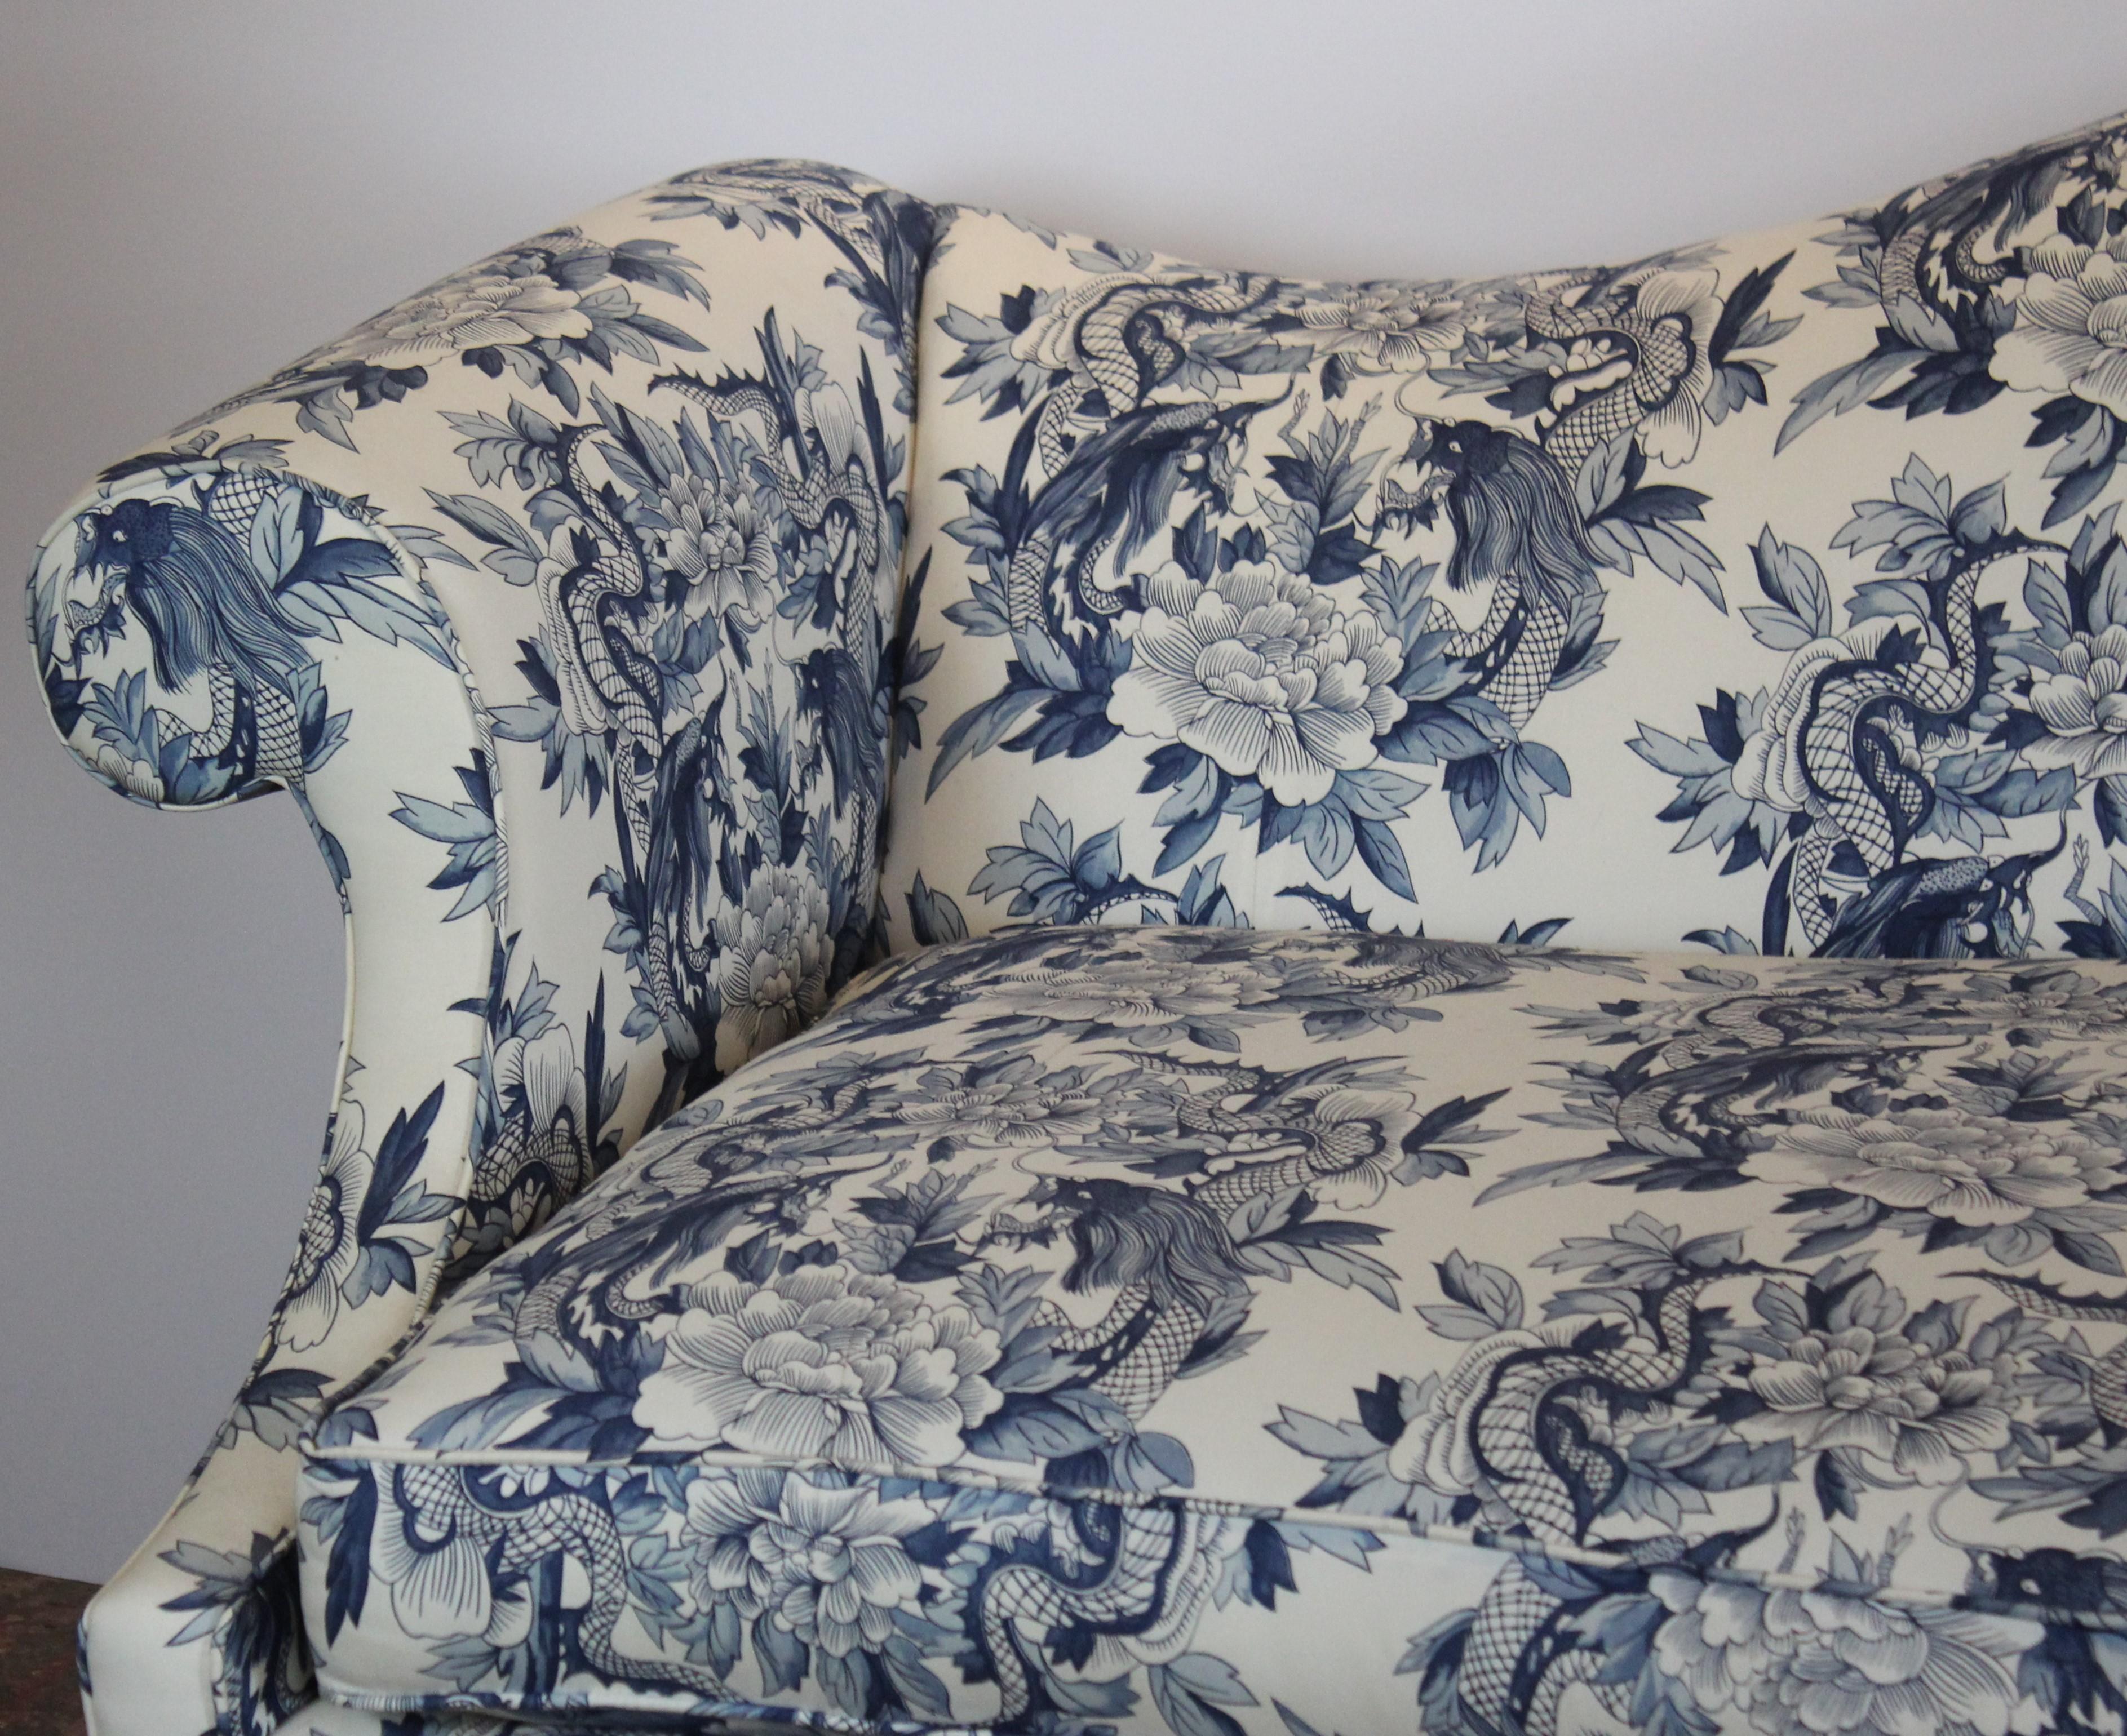 Chippendale style sofa with a camel-back form and a serpentine bow front edge. Features Ralph Lauren toile chinoiserie style blue and white upholstery with dragon and foliate detail. Sits on four tapered front legs with cross stretchers and four